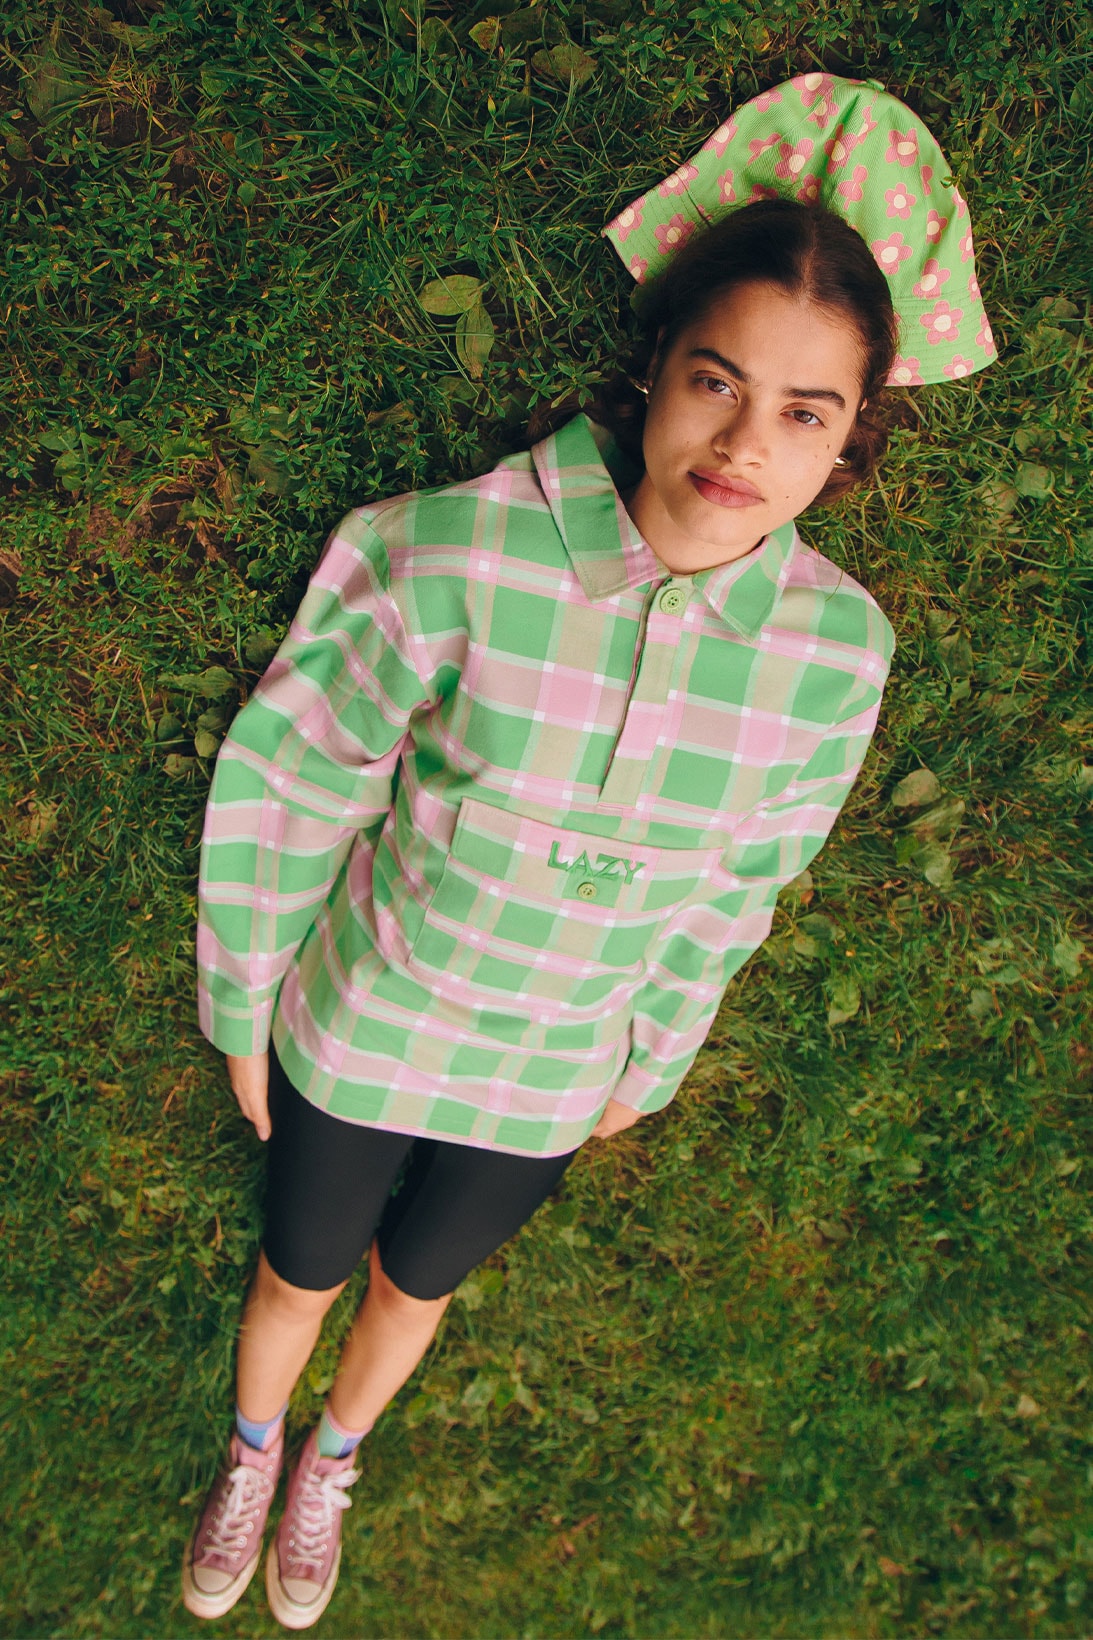 Lazy Oaf's winter collection "Lazy Waves" green pink checkered shirt